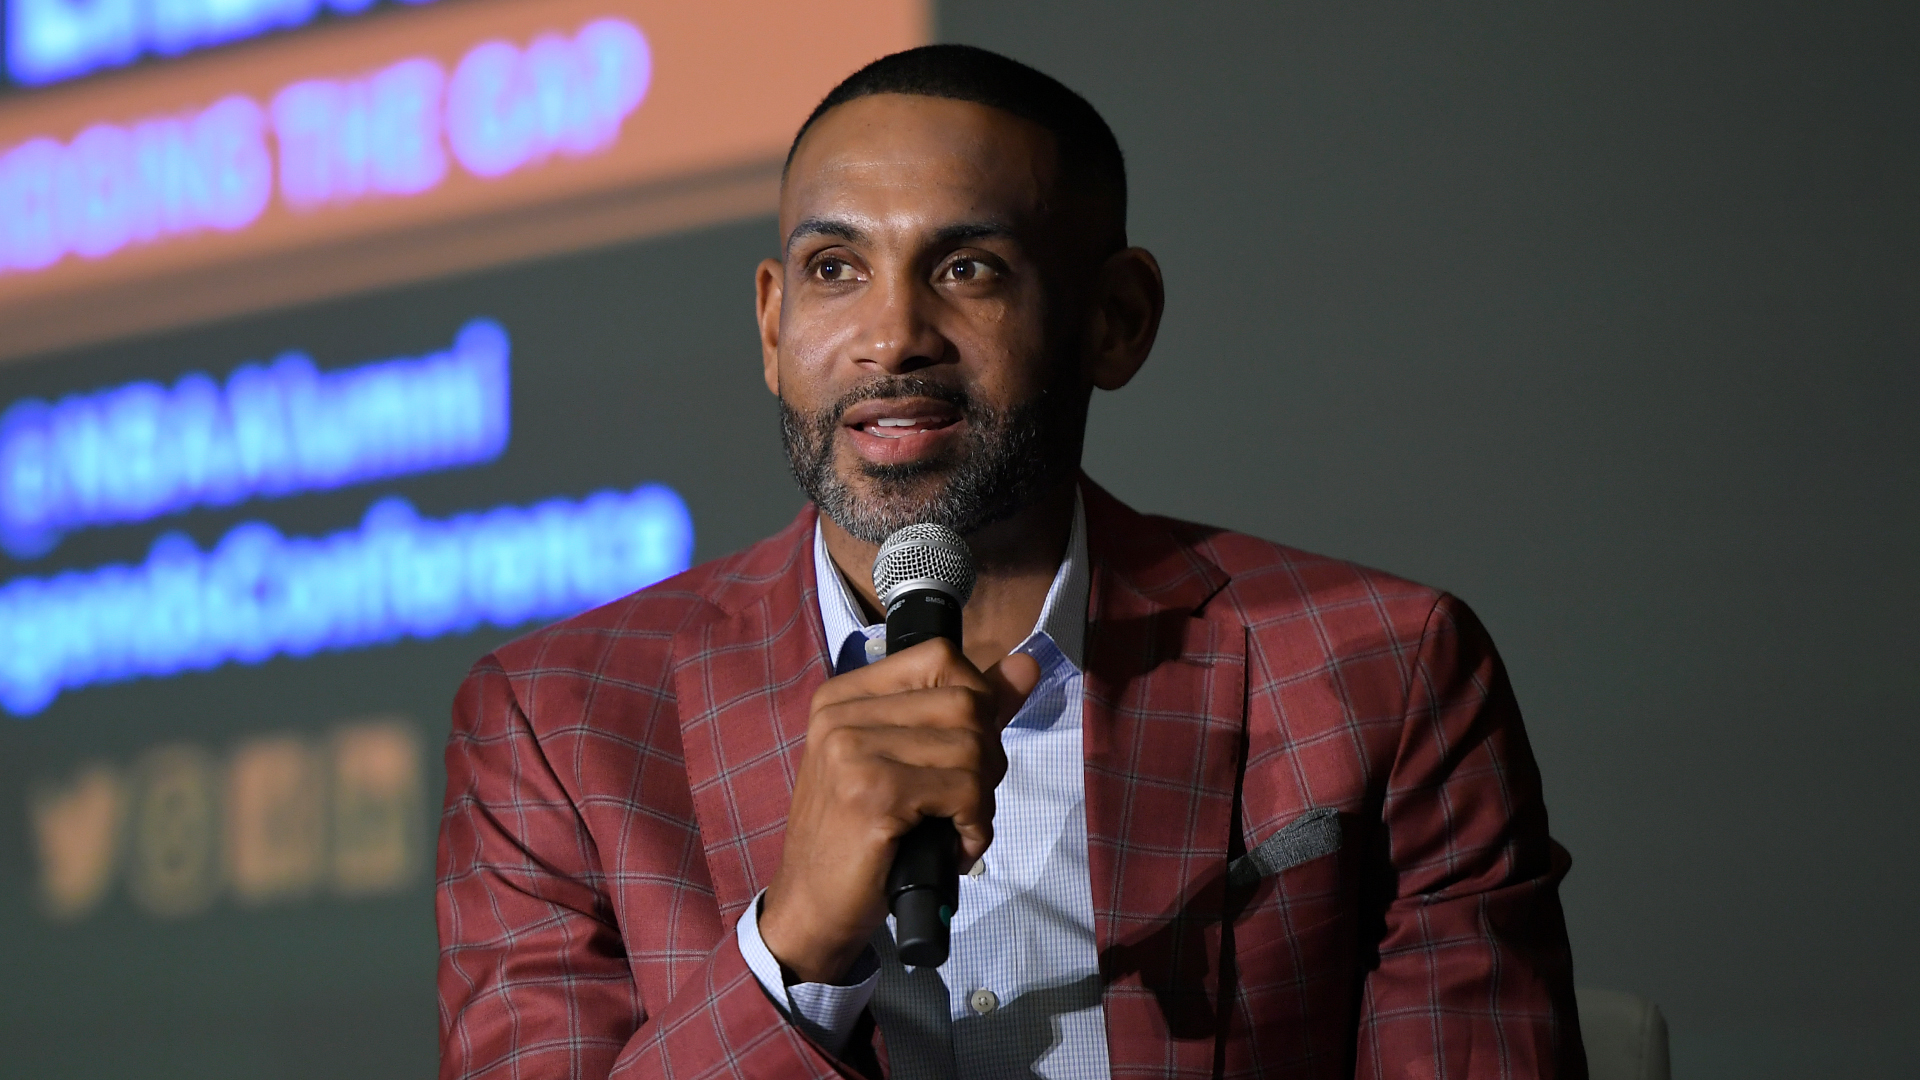 Grant Hill Joined An Ownership Group In 2015 To Purchase Stake In The Atlanta Hawks For $850M, The Team Is Now Worth $3.3B